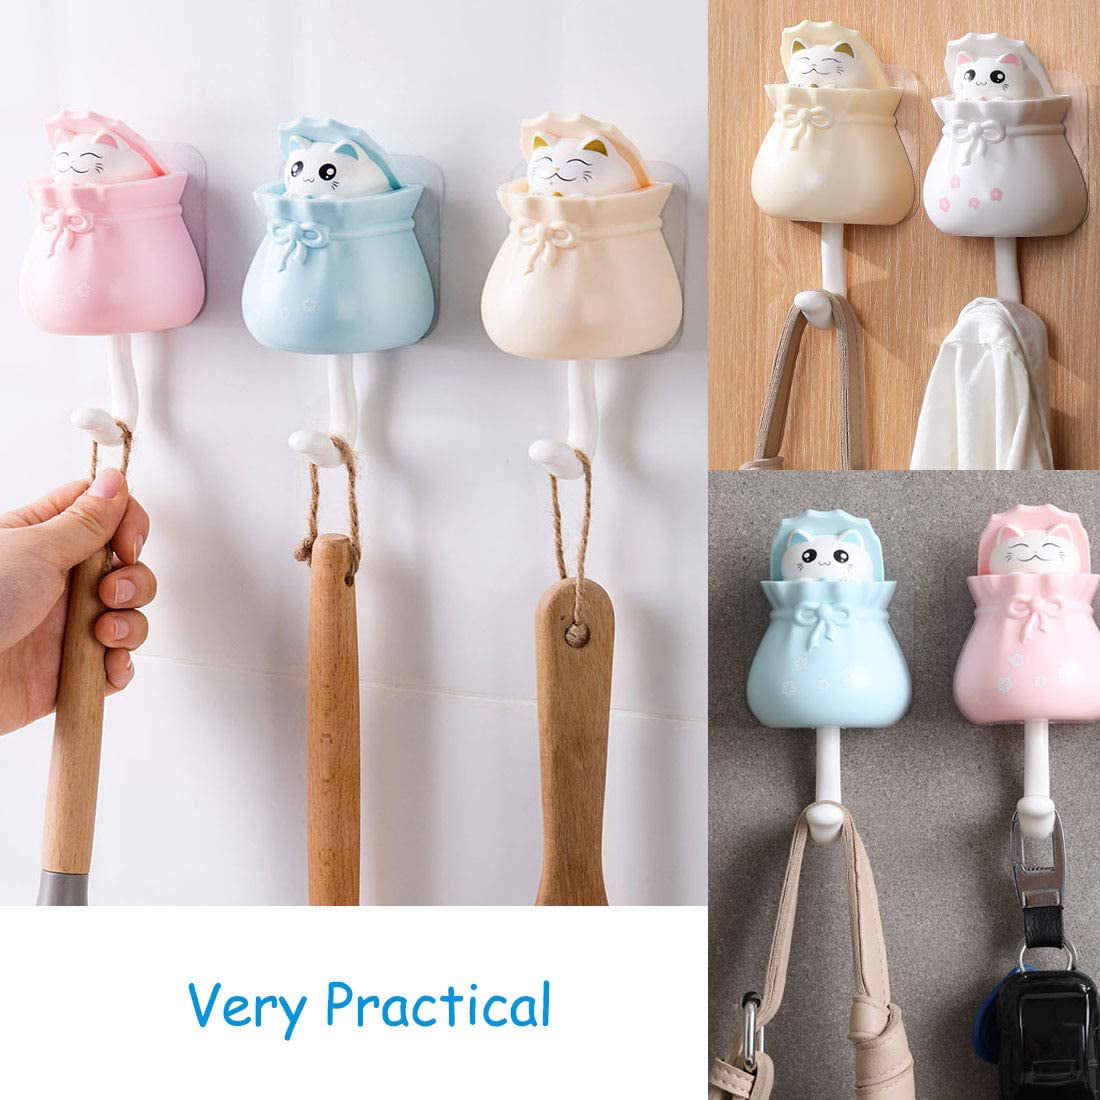 Pack of 4 cute cat hooks, creative adhesive clothes hooks, heavy-duty  decorative wall hooks for keys, towels, backpacks, and hats 